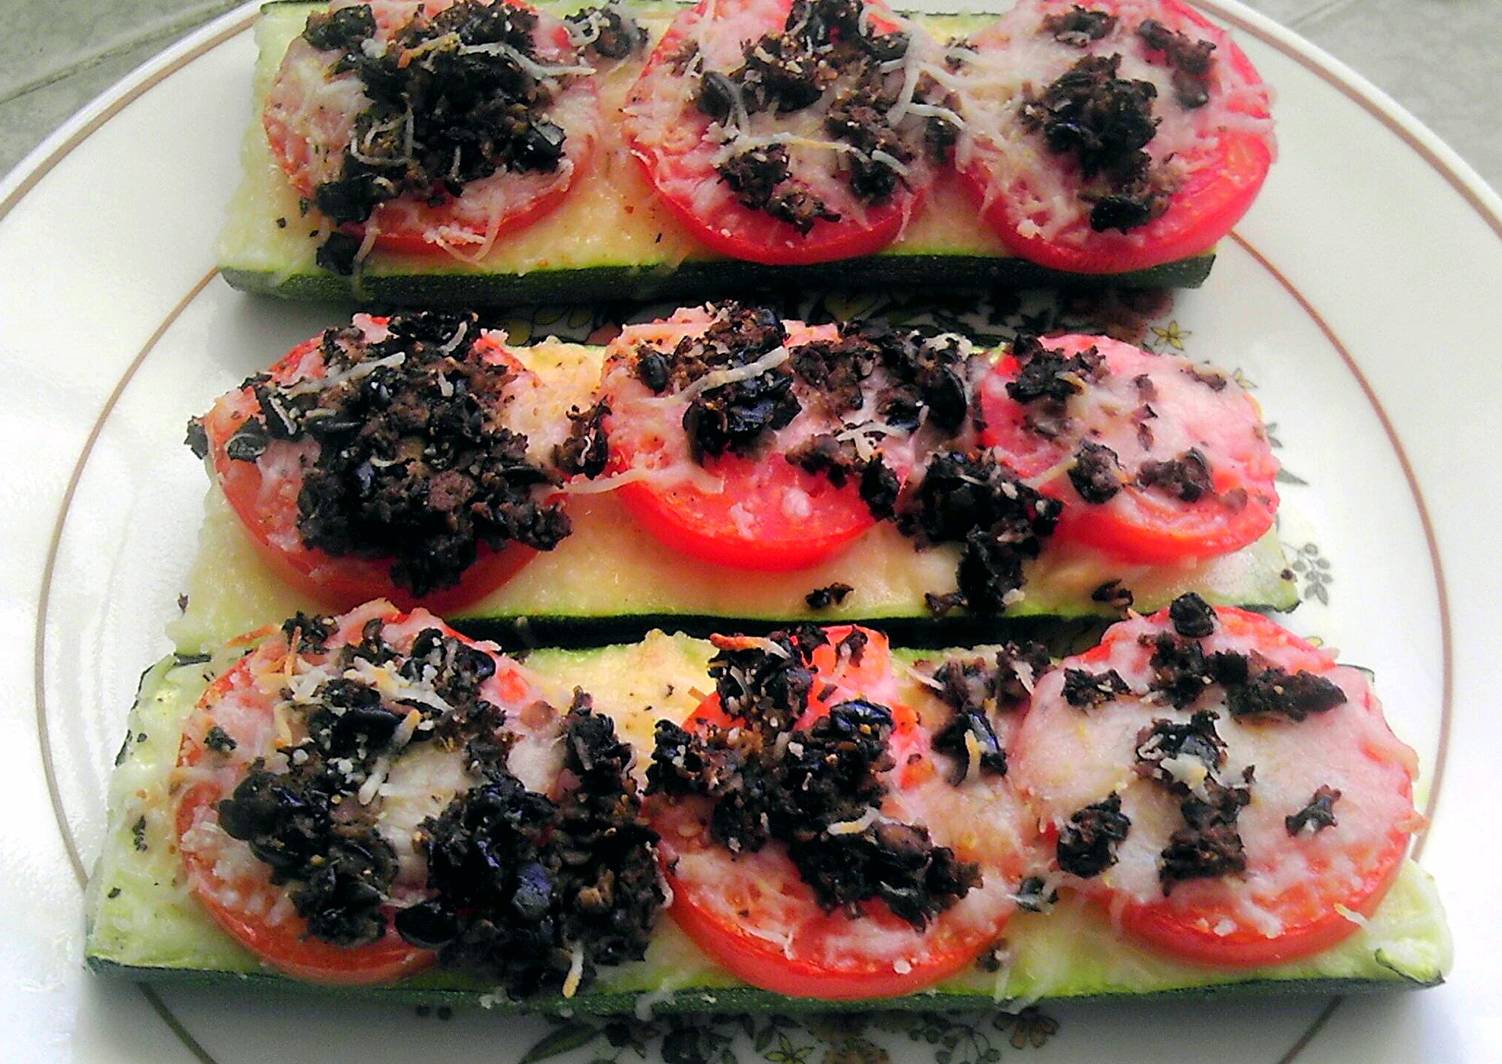 Baked zucchini topped with tomatoes &amp; cheese Recipe by sweet p - Cookpad